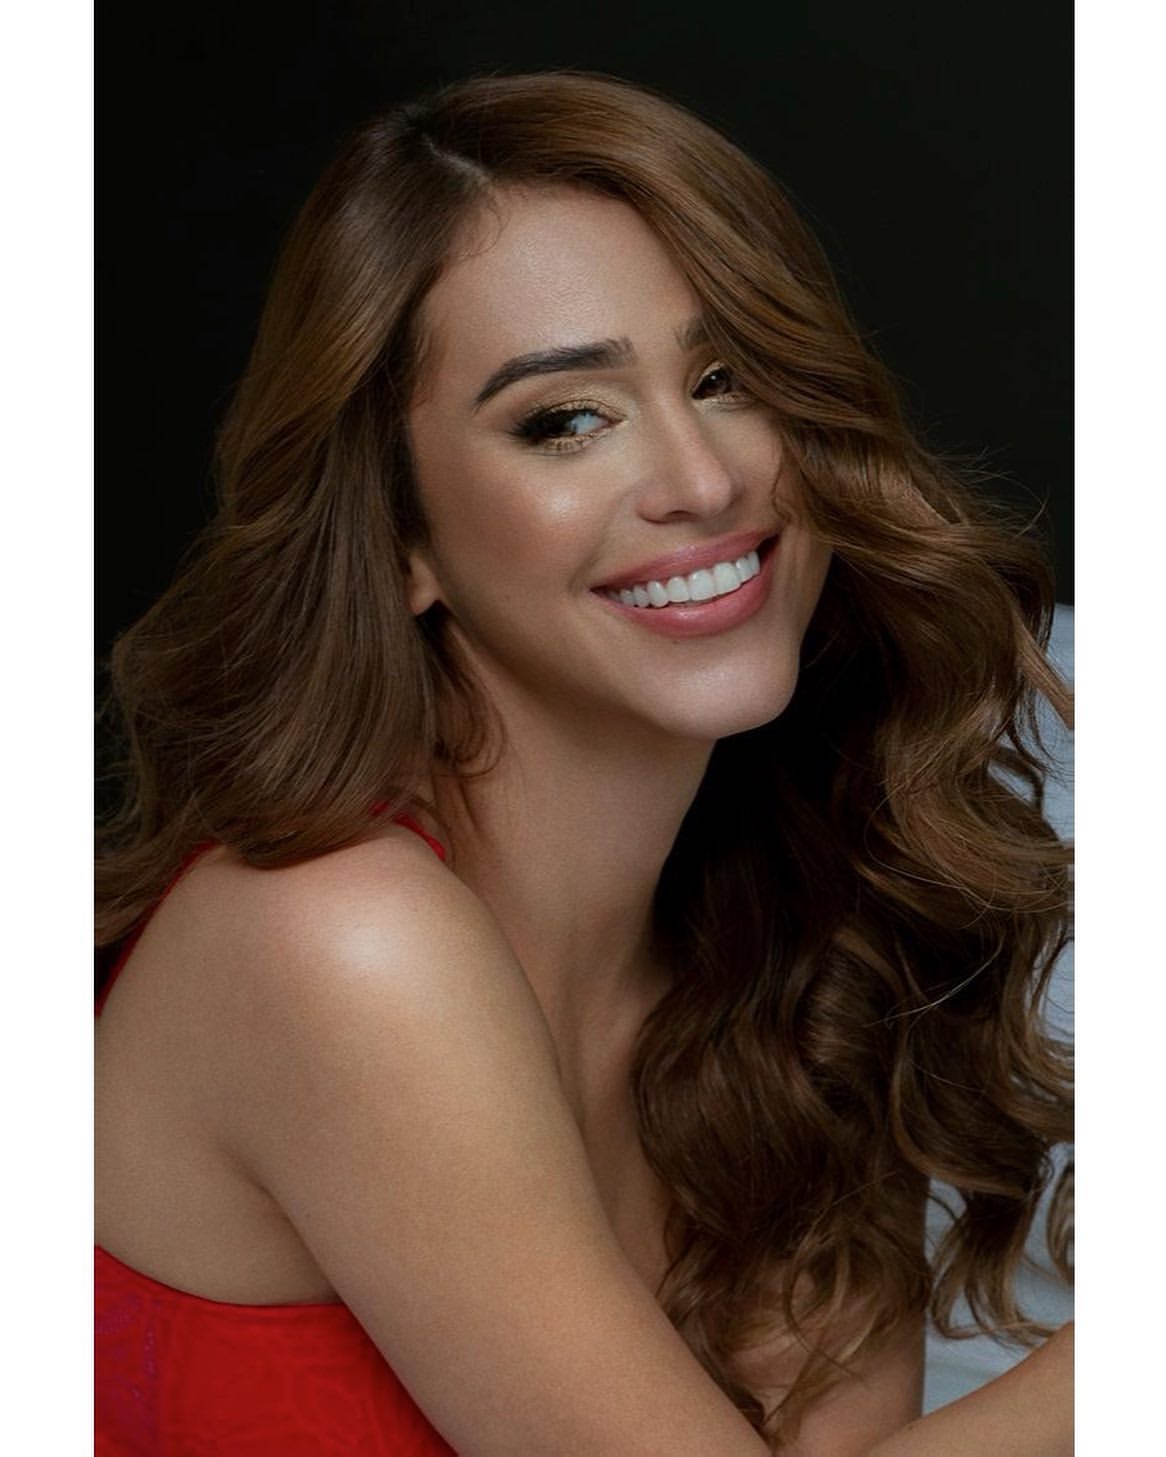 Of yanet garcia images Sexiest Weather